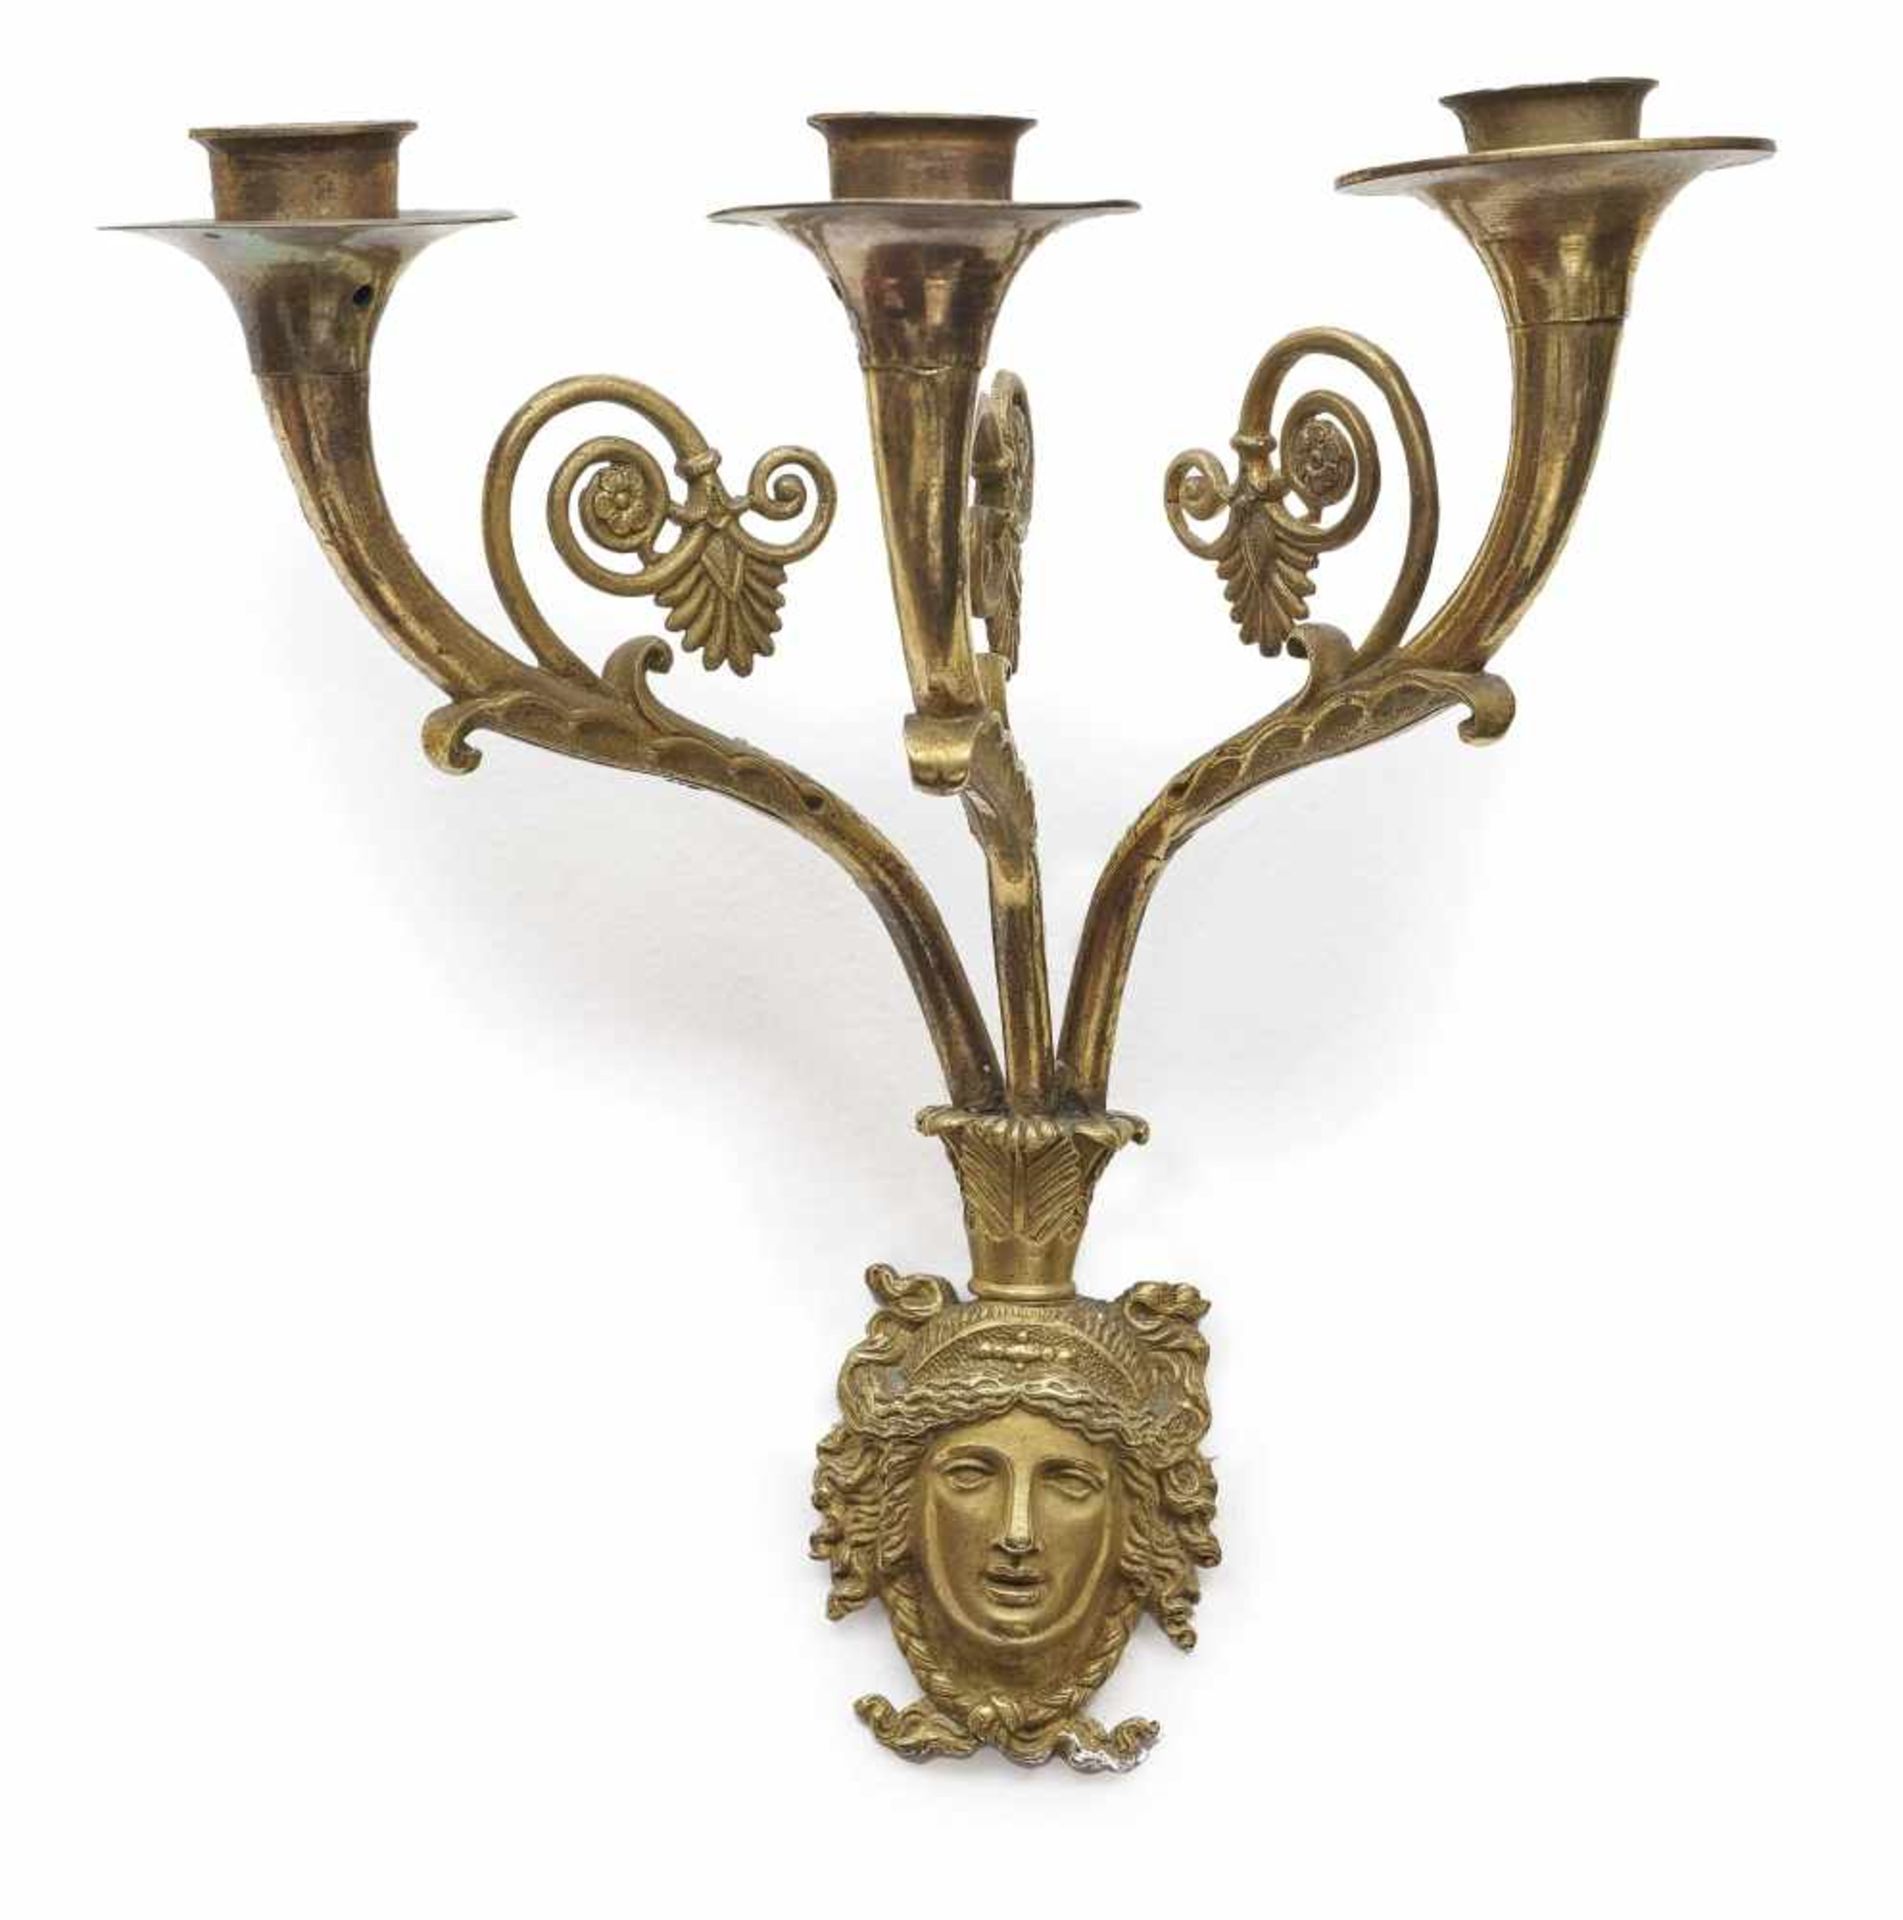 A pair of 3-light wall lightsFrance, 19th century Bronze, painted in gold. Electrified. Height 25